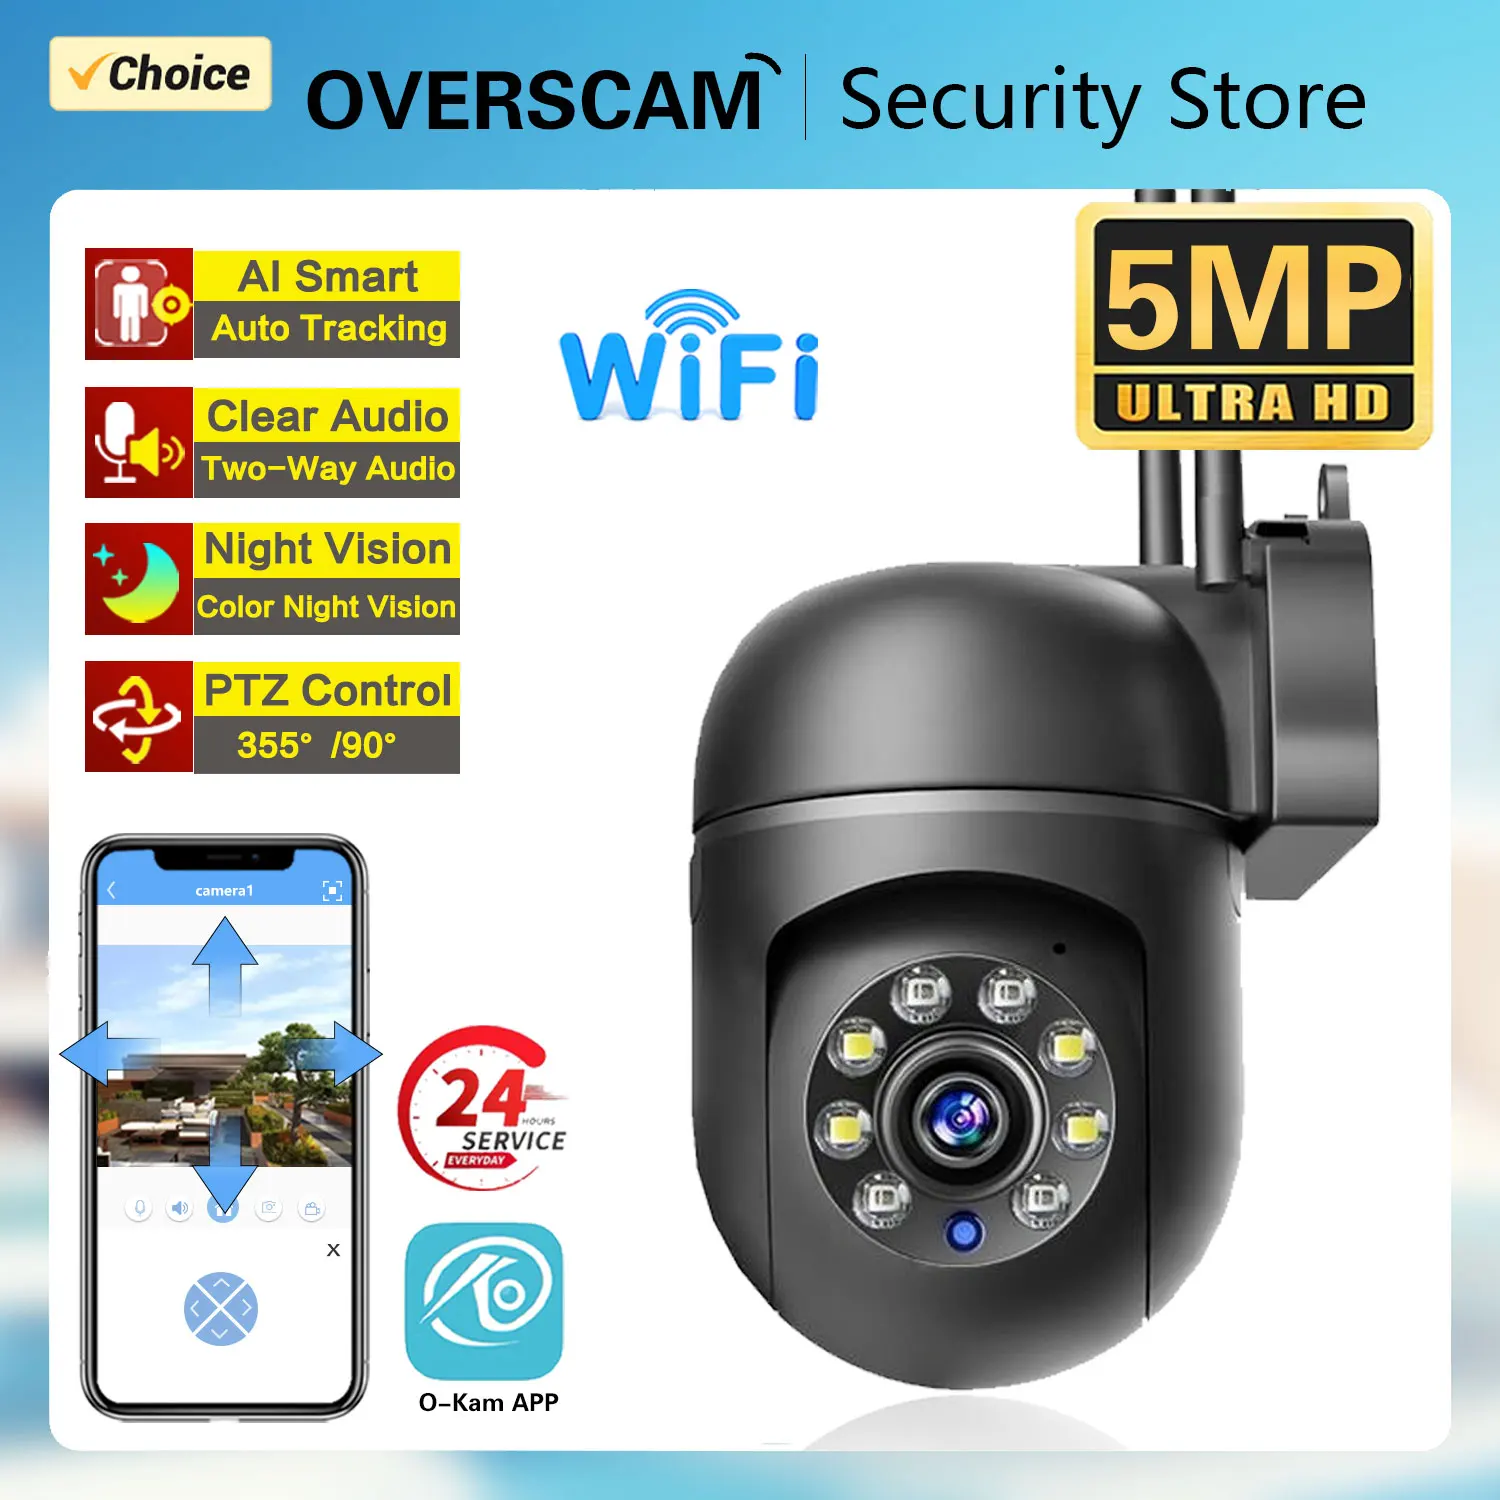 5MP Wifi IP Cameras Outdoor Surveillance PTZ Cam Security Protection CCTV Auto Tracking Night Vision Two Way Audio OKam 5G o kam 5mp wifi ip cameras outdoor surveillance 360°ptz control security protection cctv auto tracking night vision two way audio